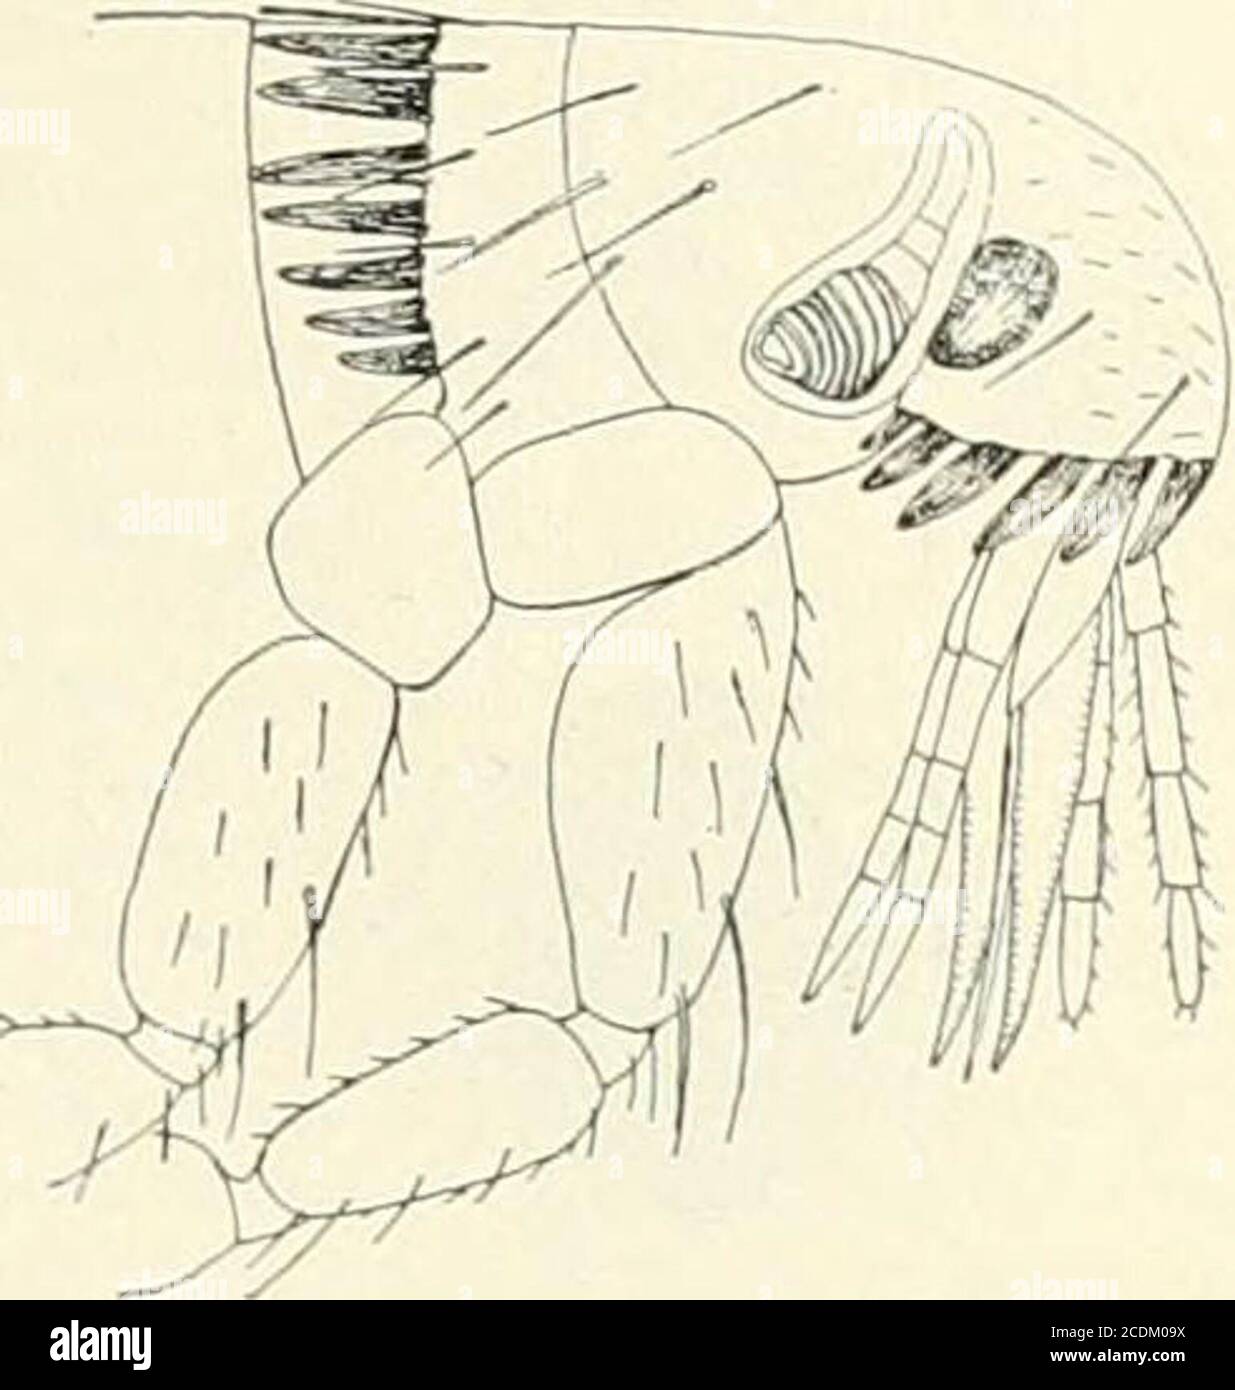 . A Reference handbook of the medical sciences embracing the entire range of scientific and practical medicine and allied science . Fig. 2m3.Pule.r irritans. Headand pronotum, sbowing form andabsence of combs. (Authors il-lustration,Dep. Ag.). Fig. SSSi.—PiiUx nen-aticeps. Frontpai-t of body sbowing combs on headand pronotum, enlarged. (Authorsillustration, Bull. United States Dep.Ag.) bristles on the abdominal segments, the large luale clasp-ers, and the dark reddish or piceous color. It has a verywide distribution over the world, and has been a fa-miliar if not welcome guest in dwellings fr Stock Photo